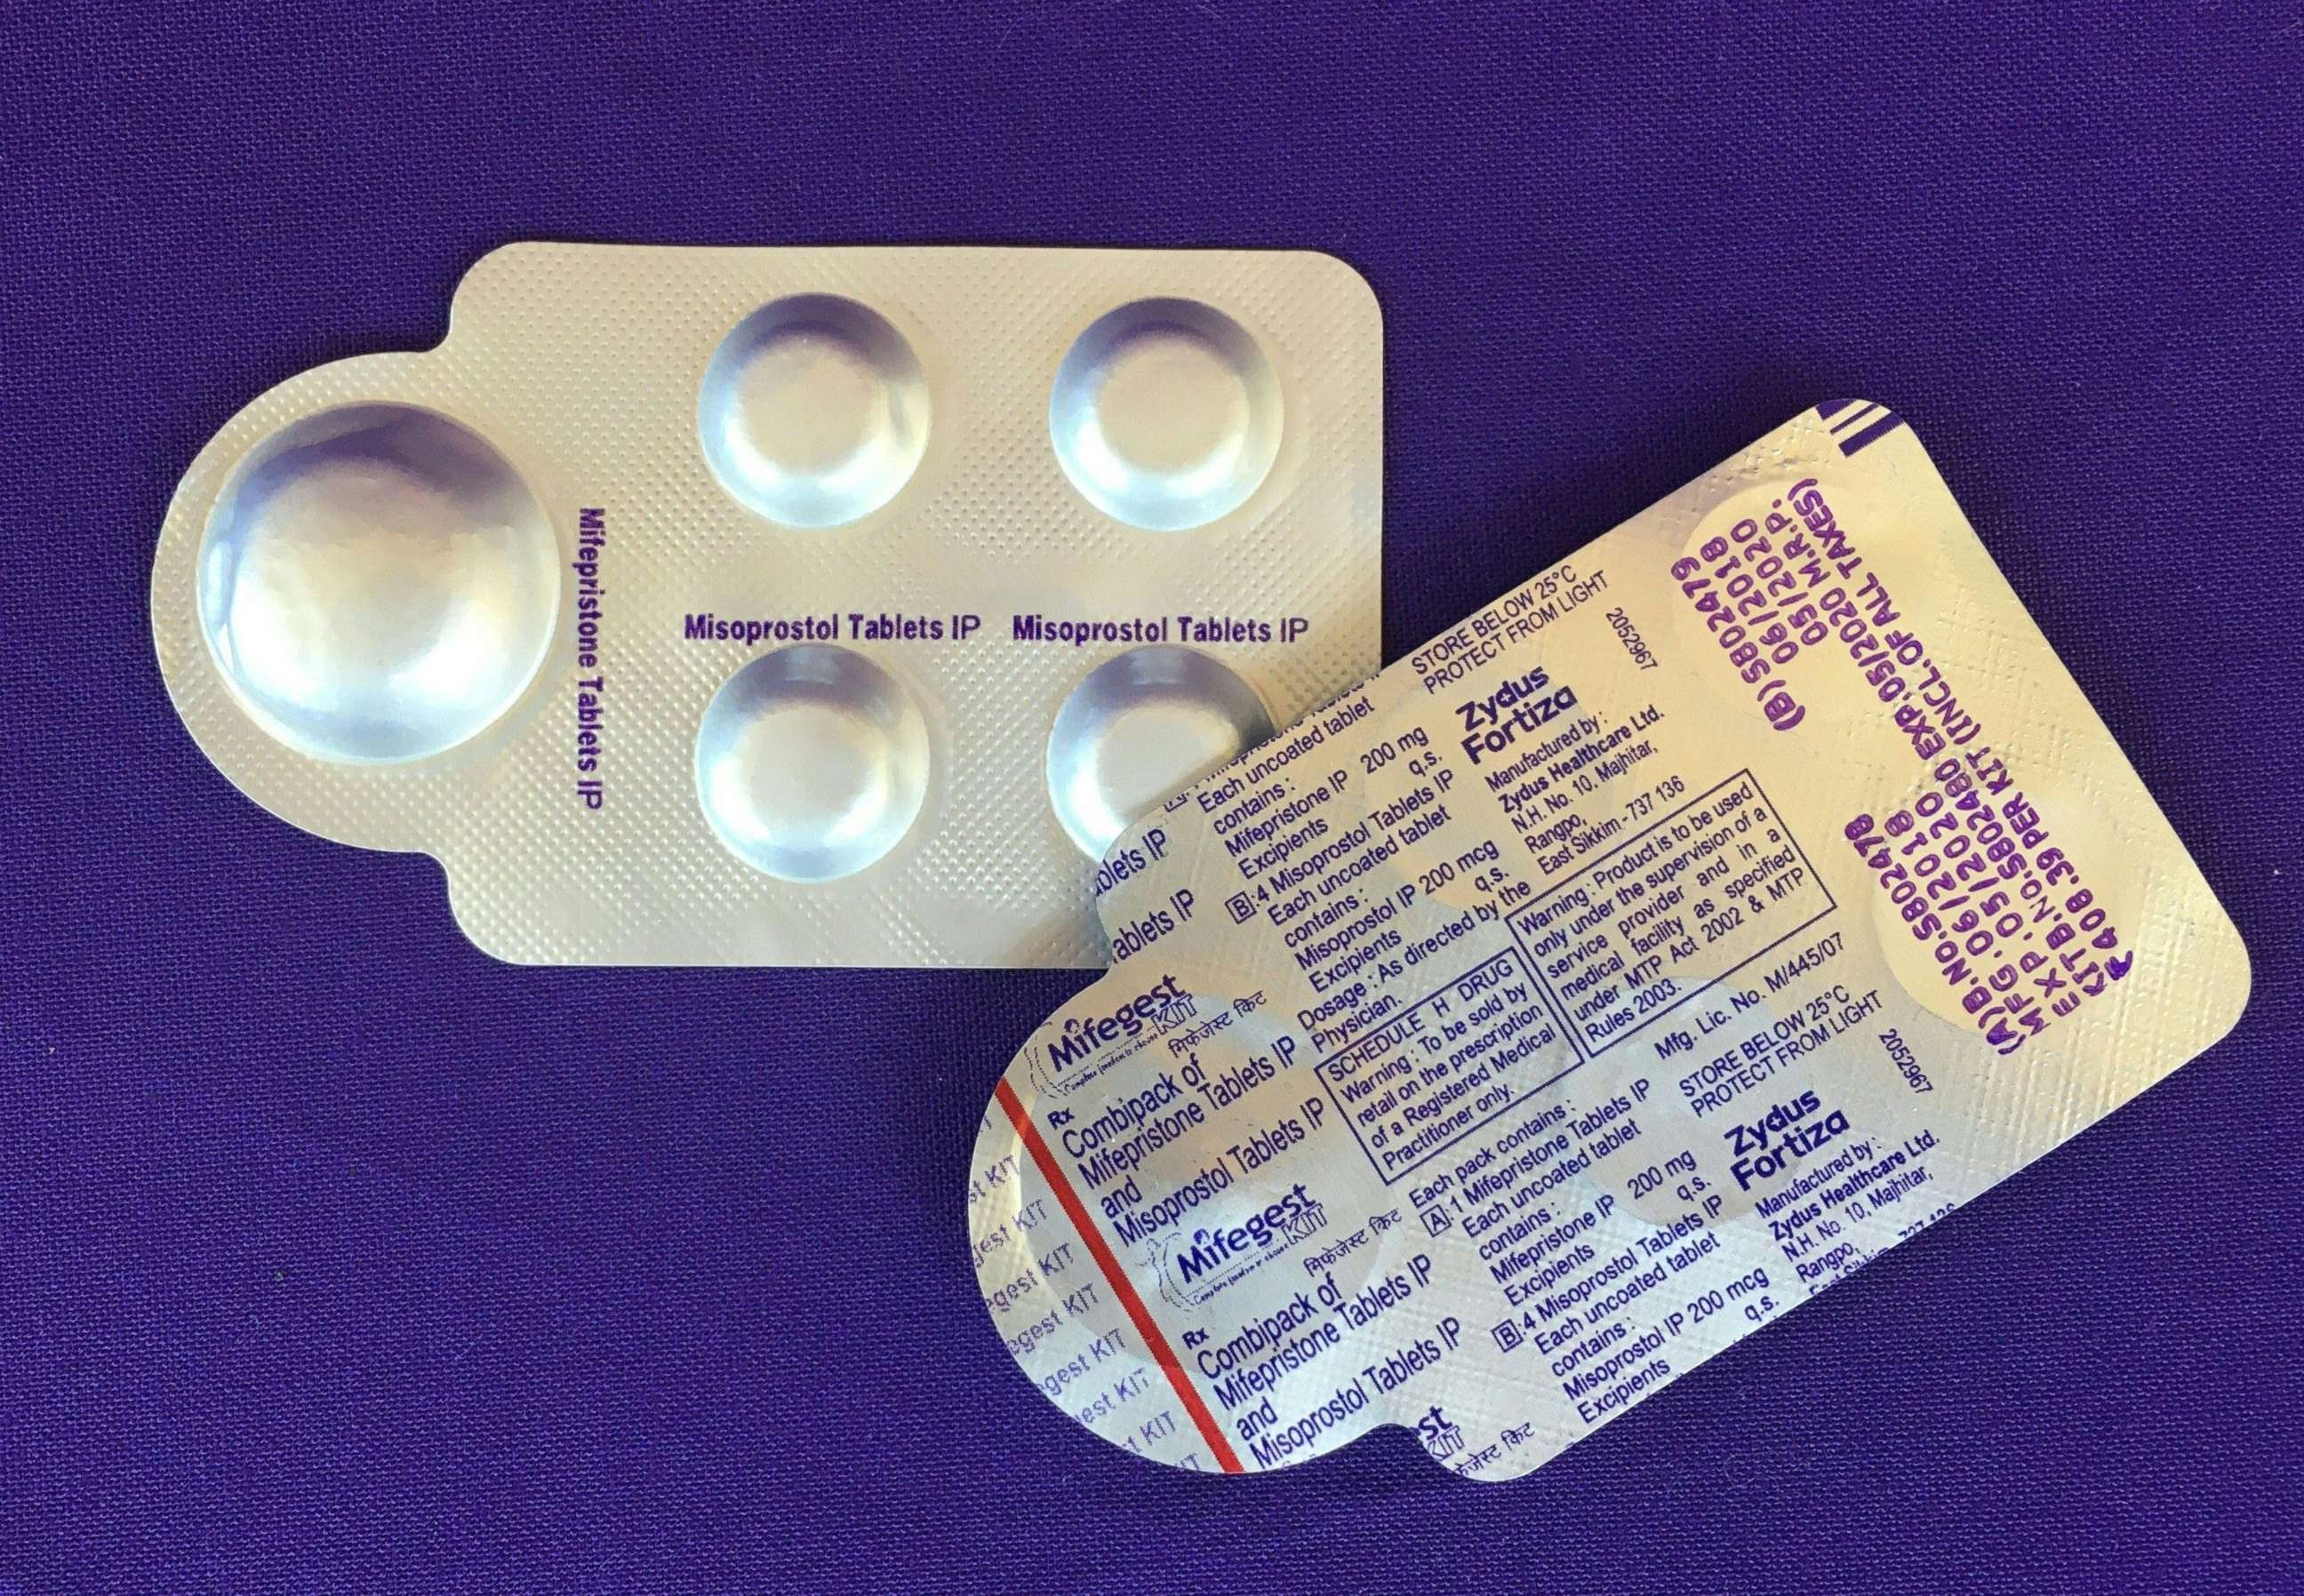 PHOTO: A combination pack of mifepristone, left, and misoprostol tablets, two medicines used together, also called the abortion pill.